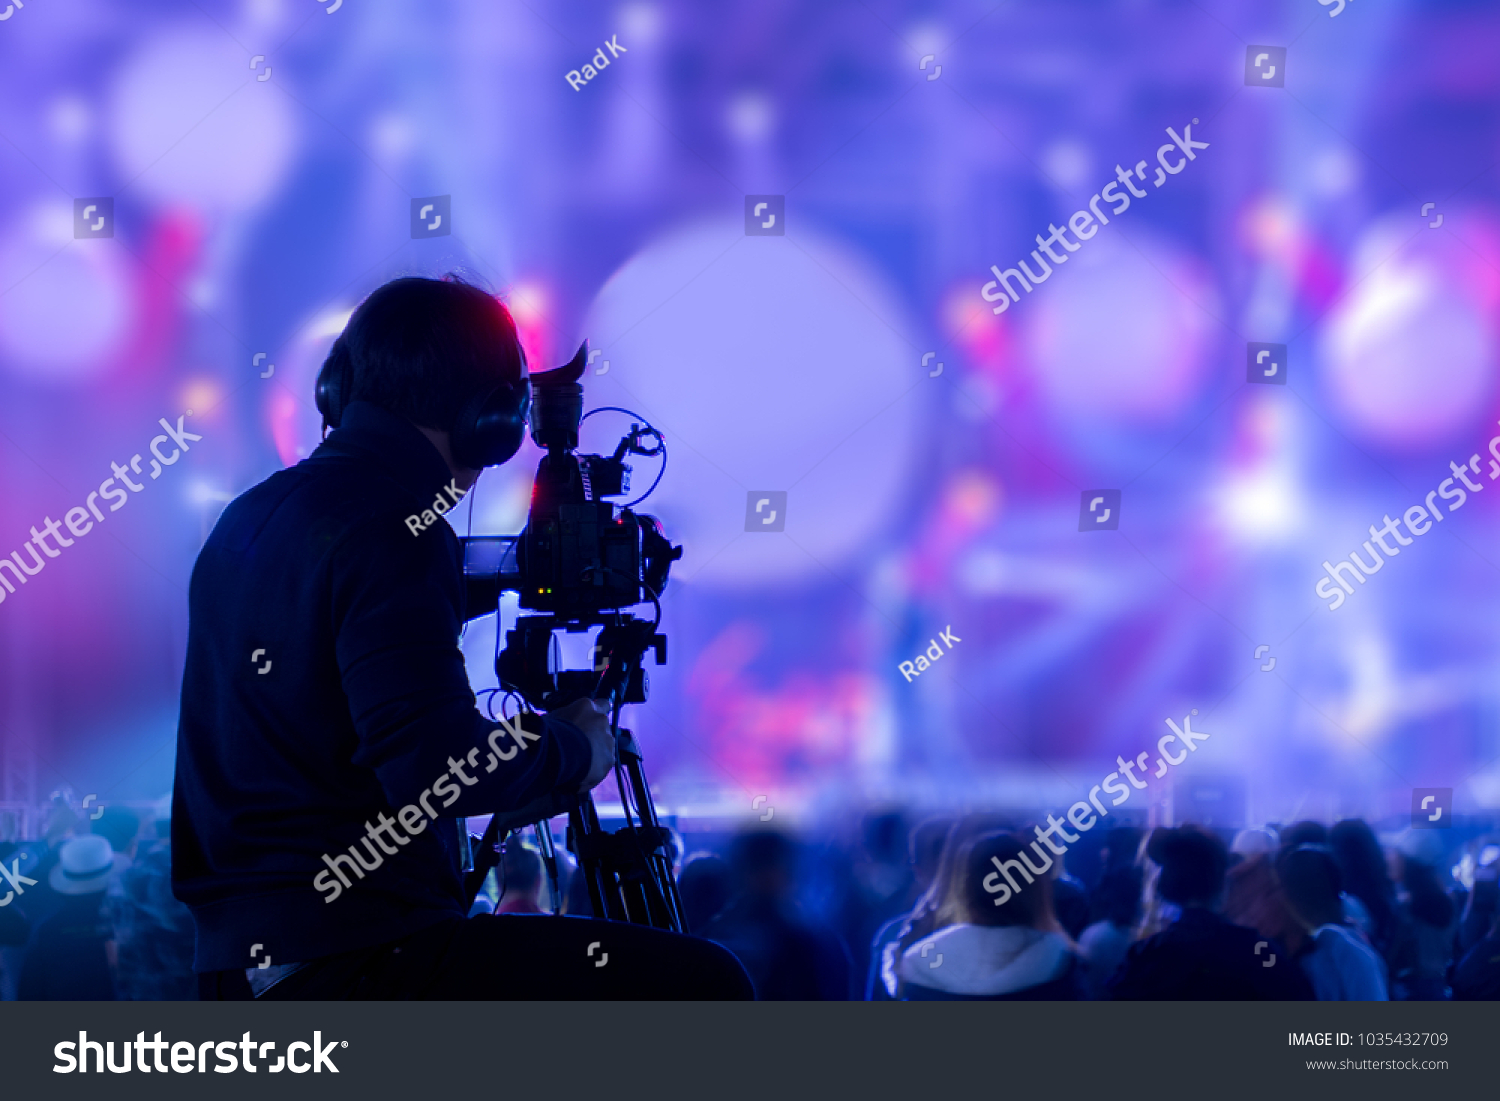 The filmmaker is recording and broadcasting live concerts on camcorders. Professional Video Recording Business #1035432709